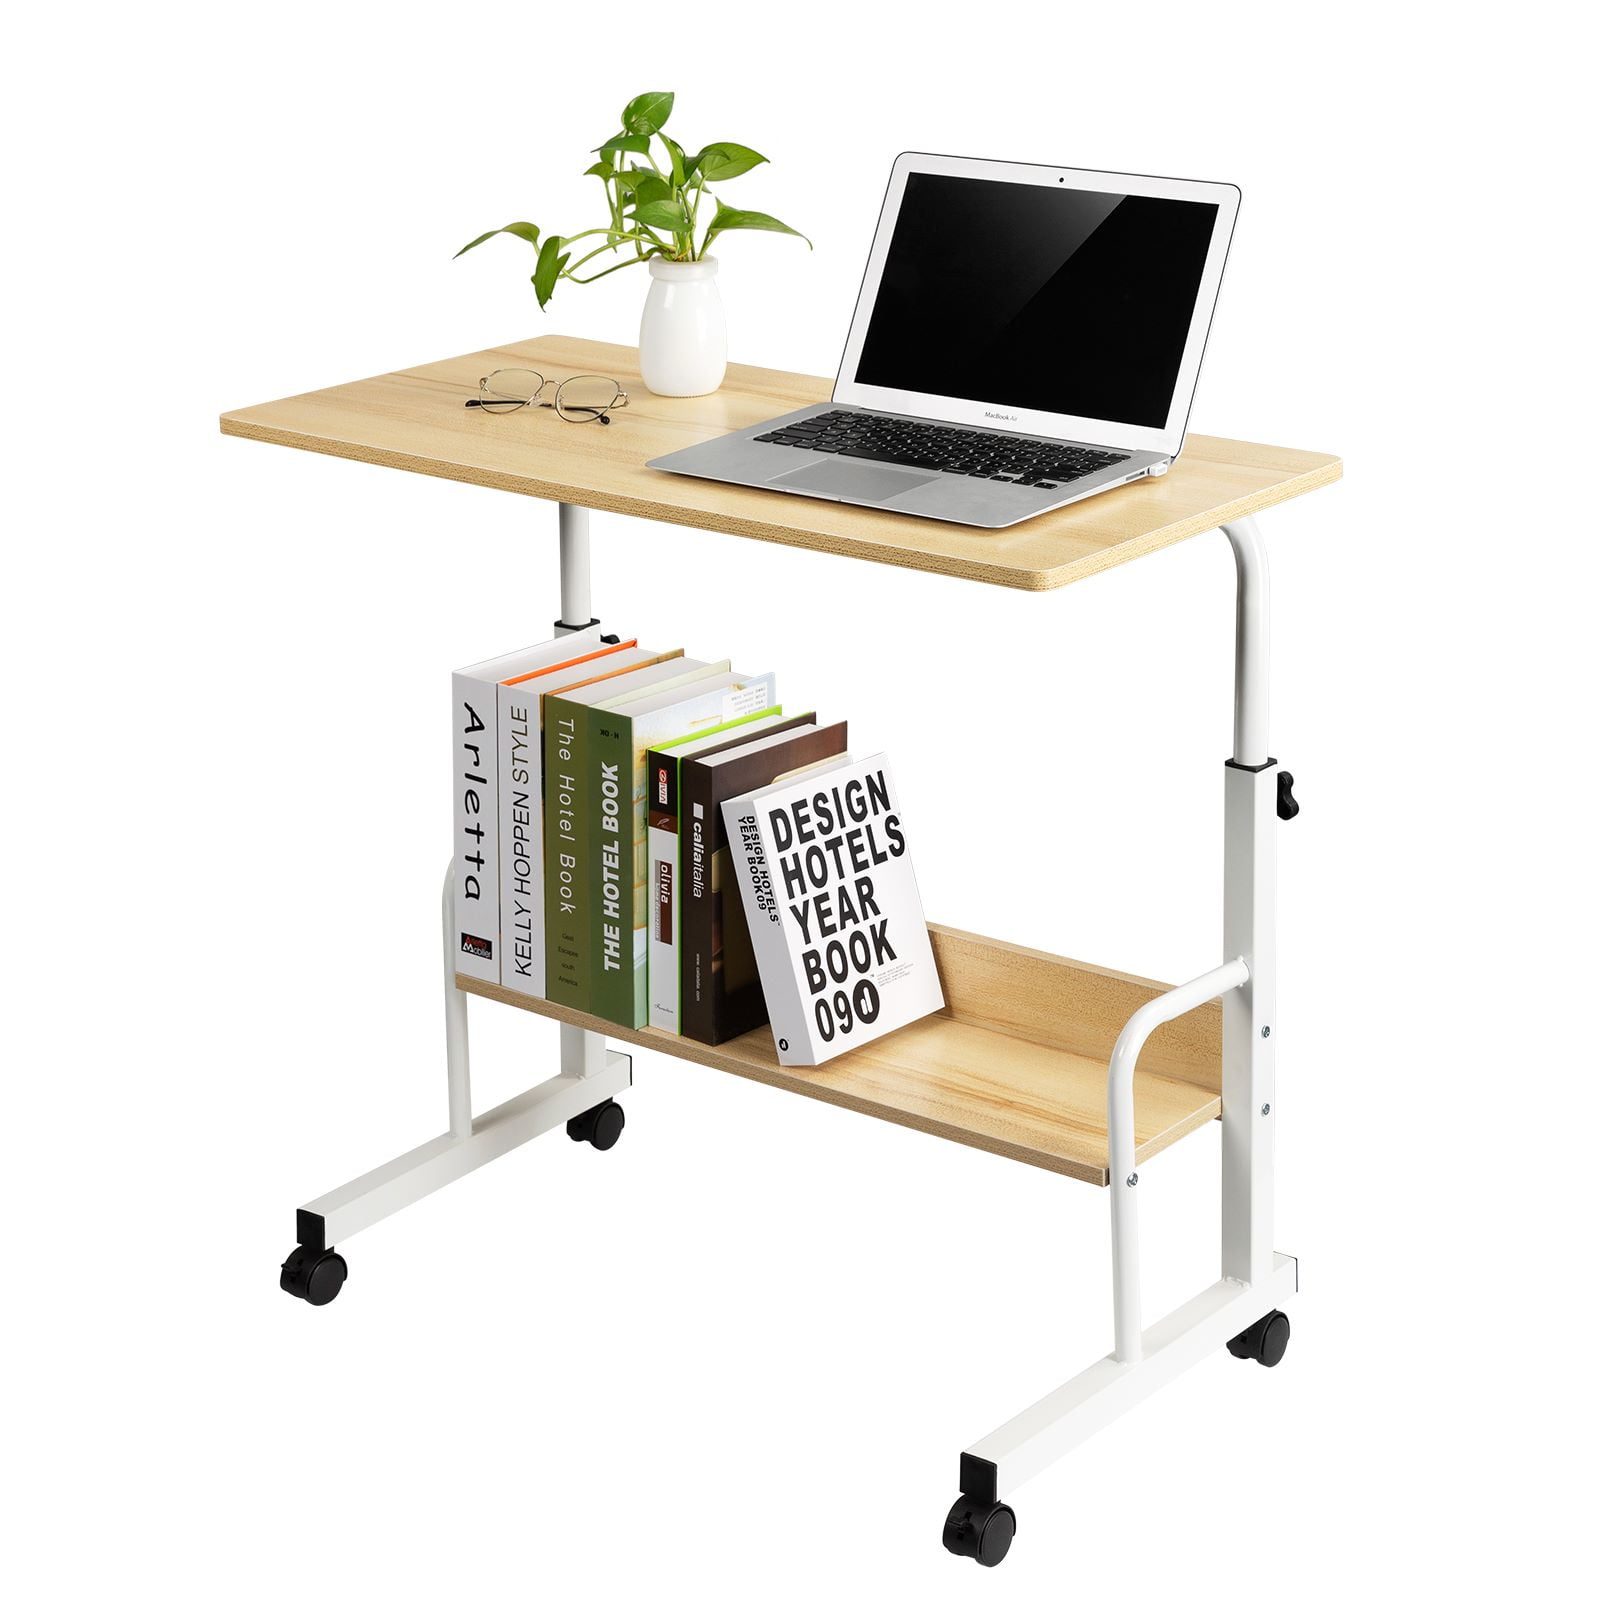 23.6, Rustic Brown GAJOO Mobile Side Table Mobile Laptop Desk Cart Tray Table Adjustable Sofa Side Bed Table Portable Desk with Wheels Student Laptop Desk 